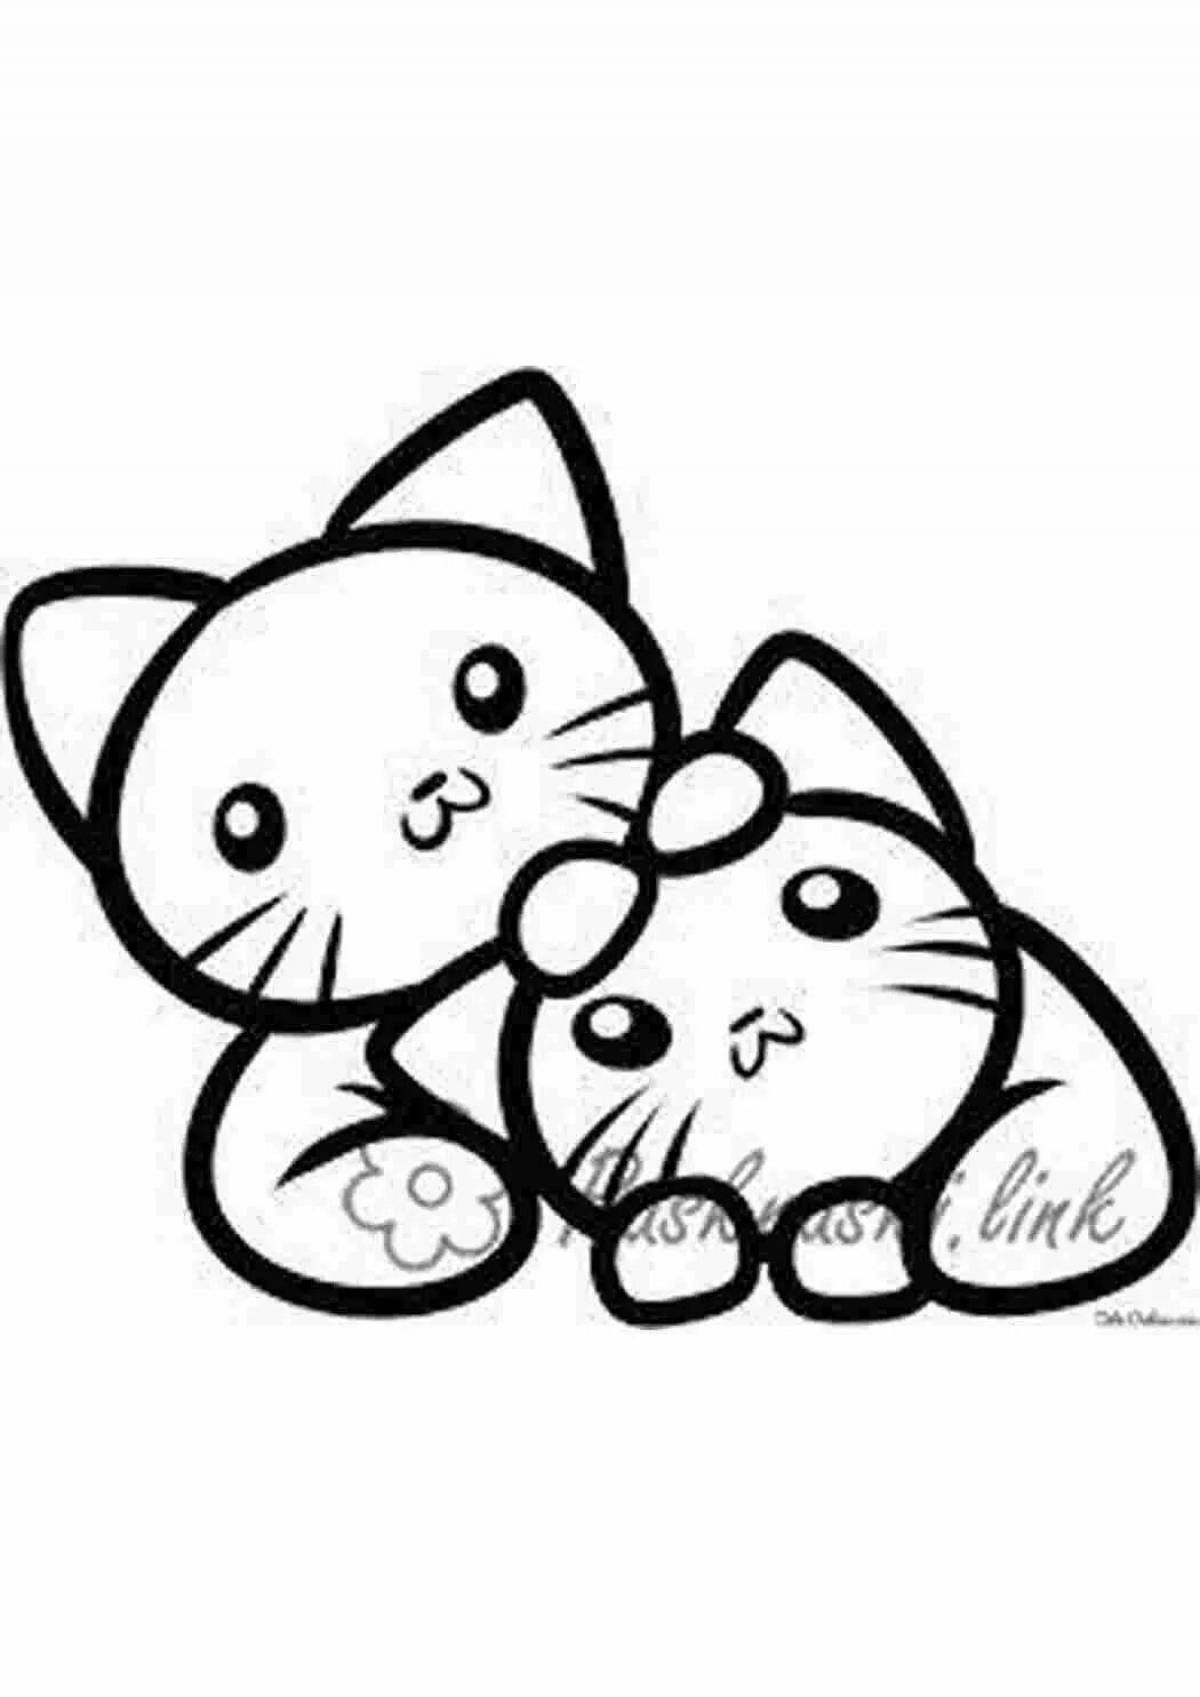 Cutest cat fluffy face coloring book